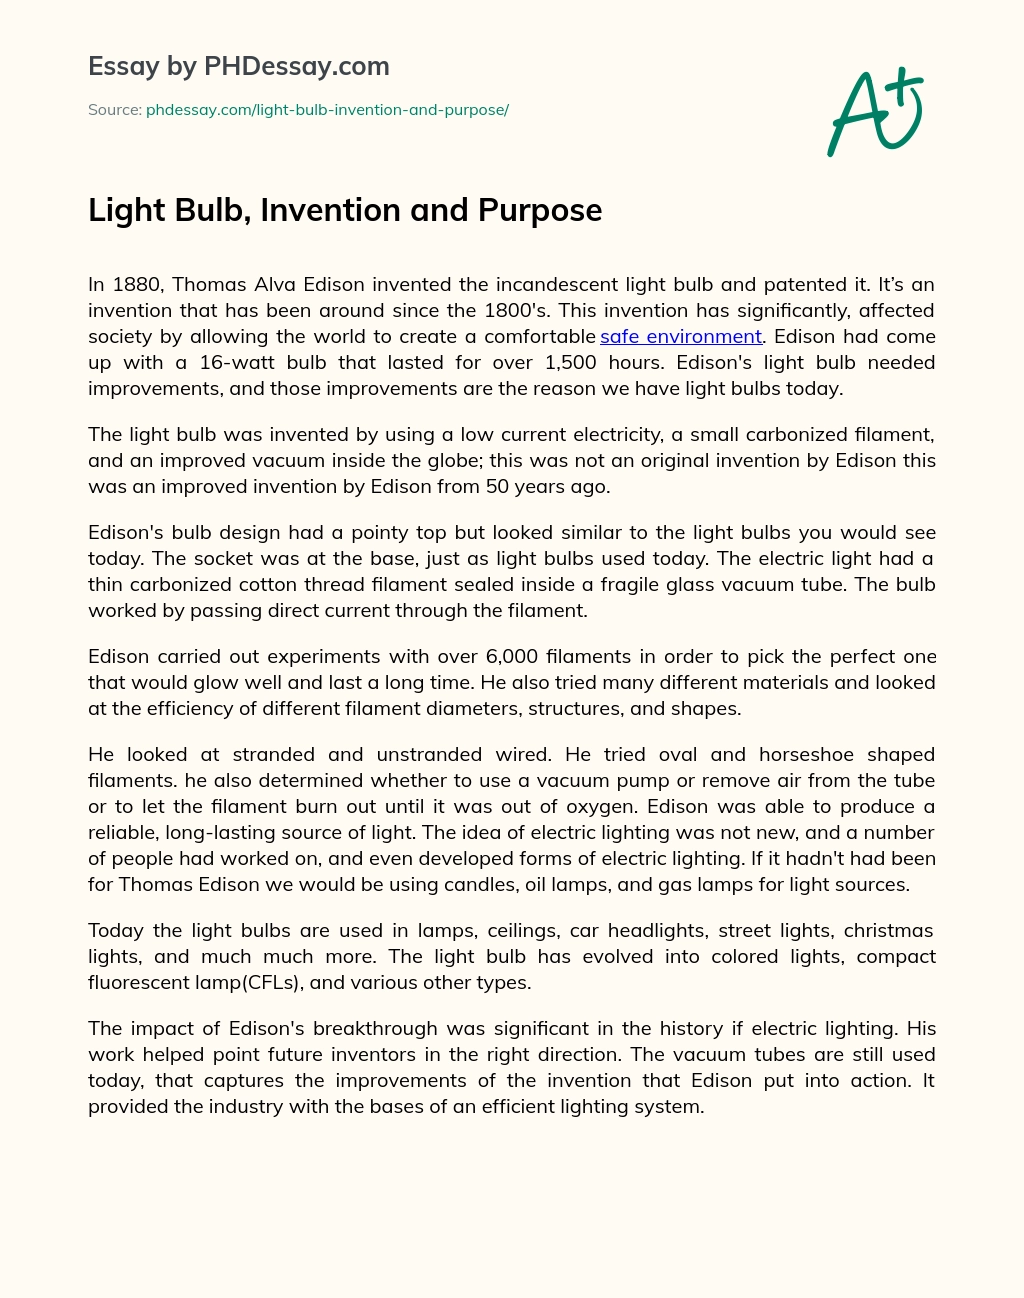 Light Bulb, Invention and Purpose essay